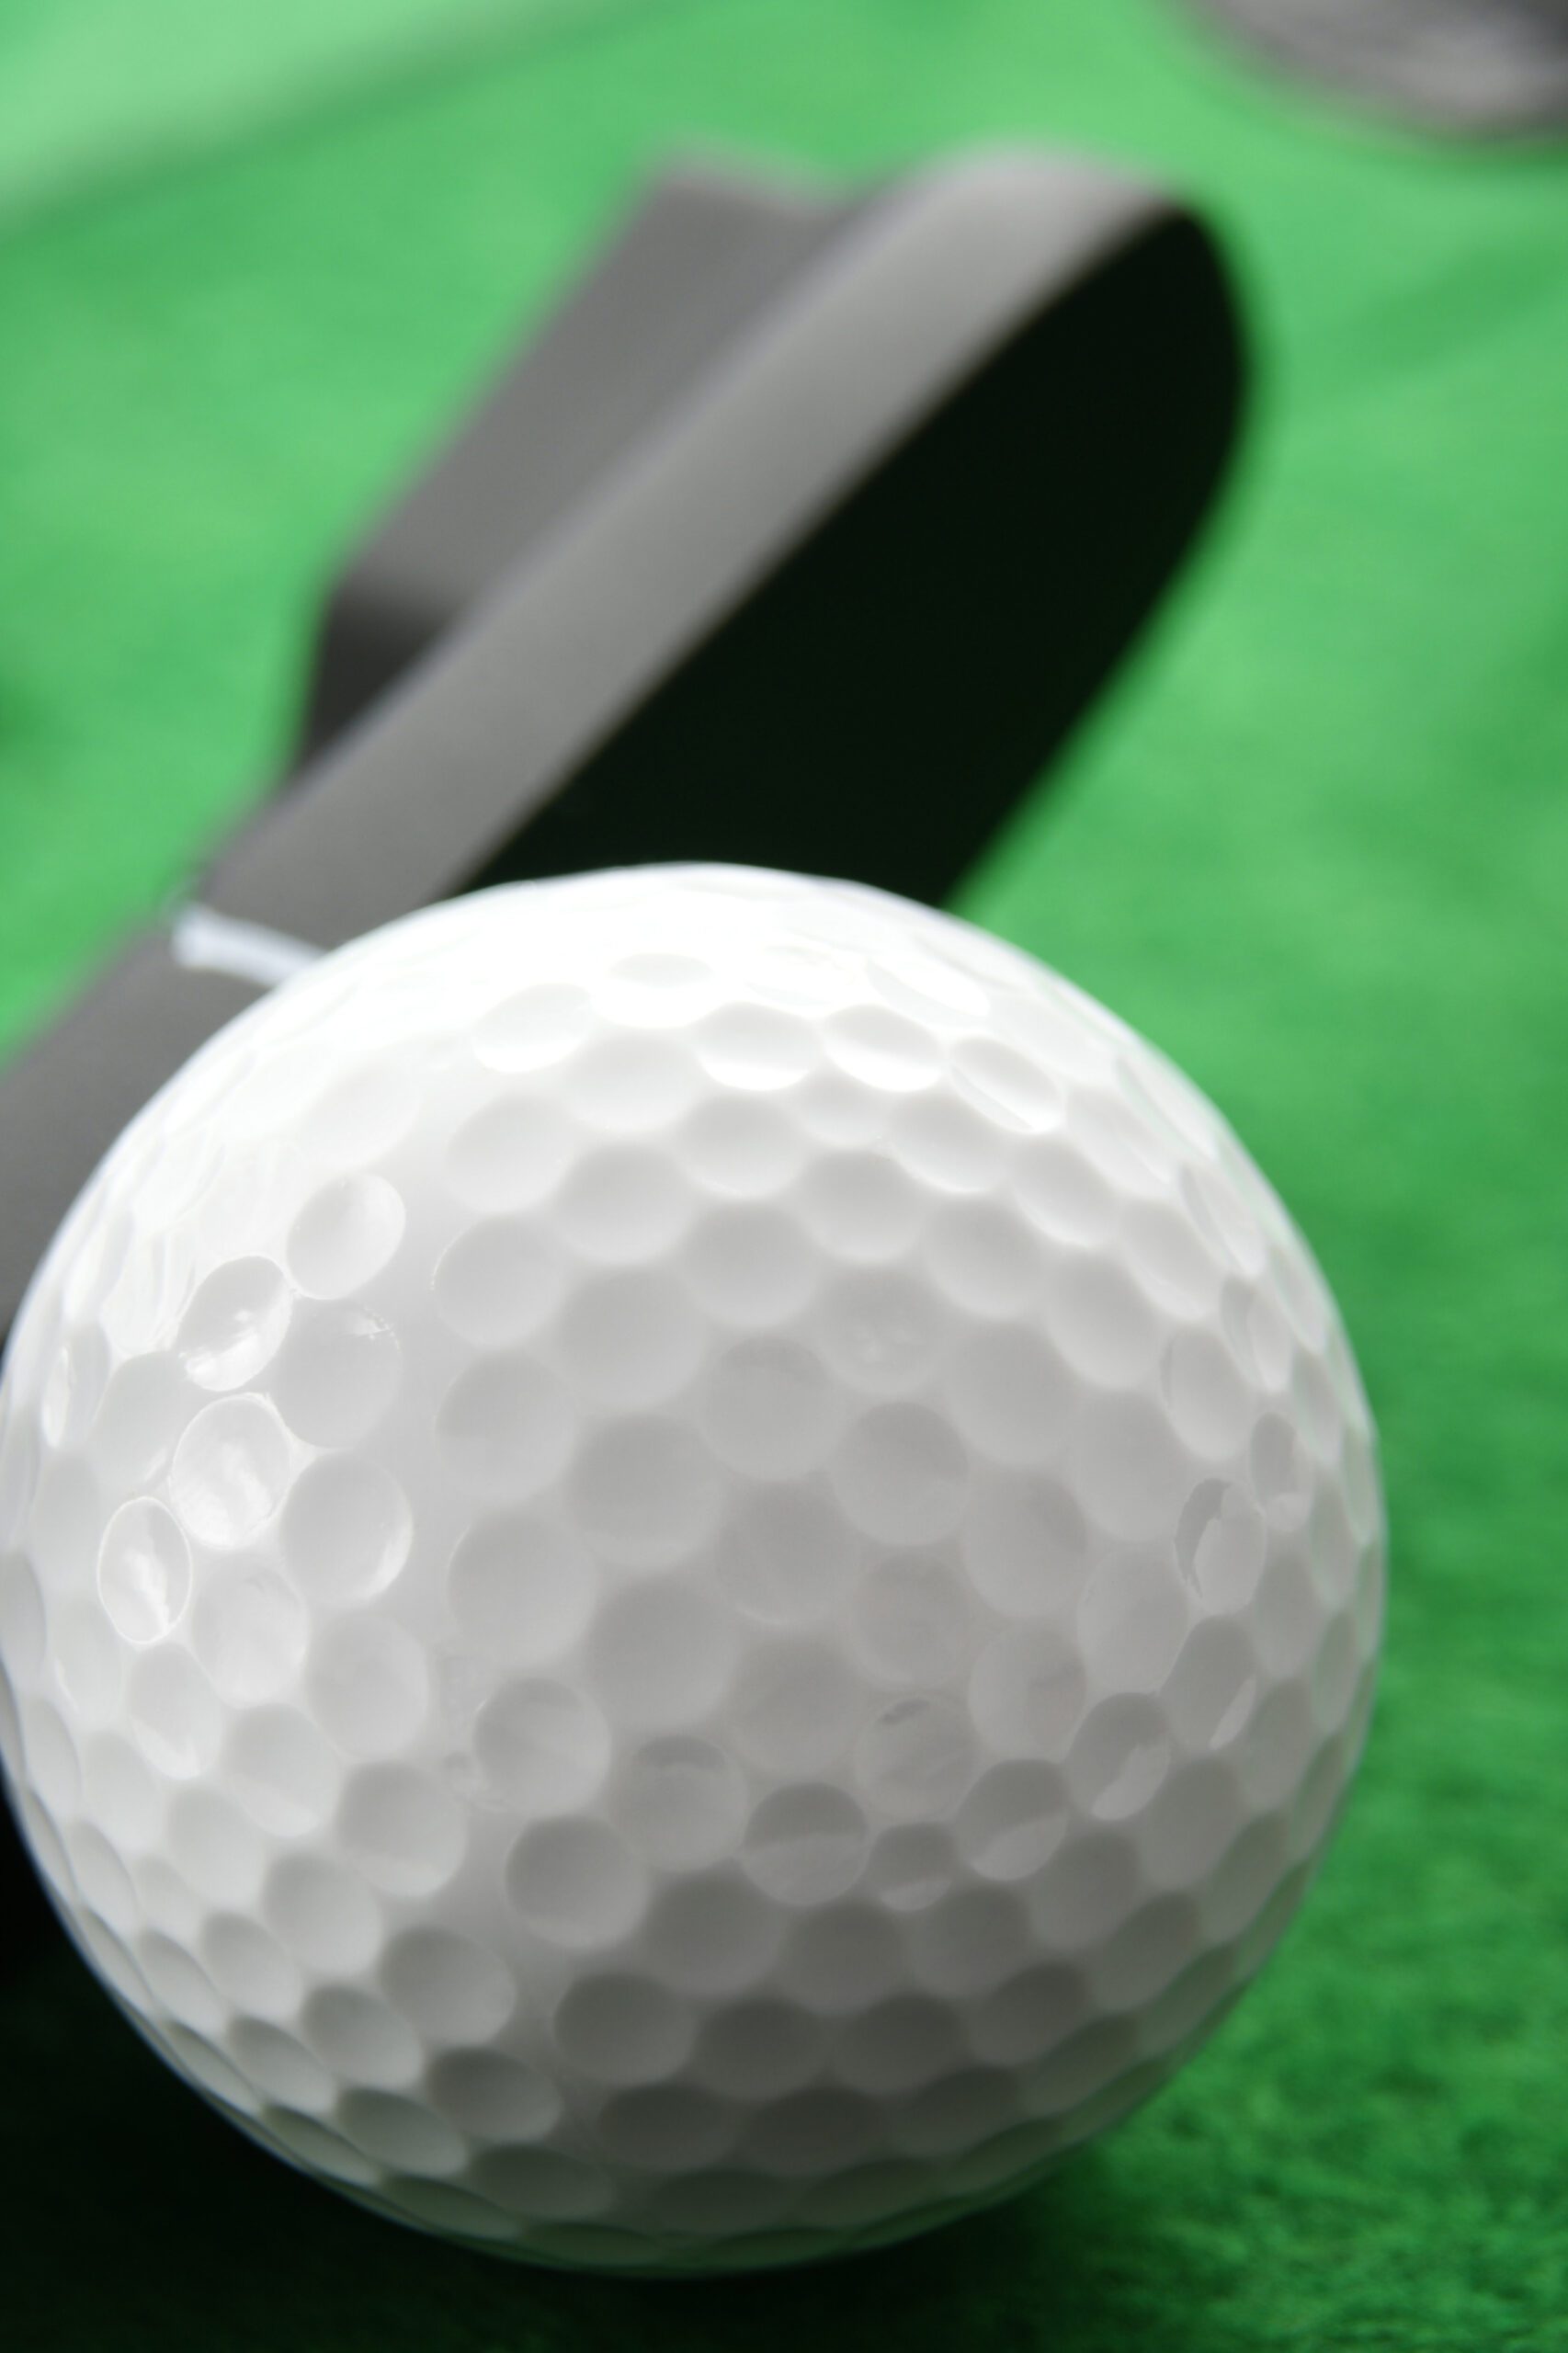 U.S. Golf and Games | Family Fun Center in Houston, TX - Mini Golf, Go Karts, Batting Cages, Arcade Games | Open 7 Days a Week. Experience the excitement today